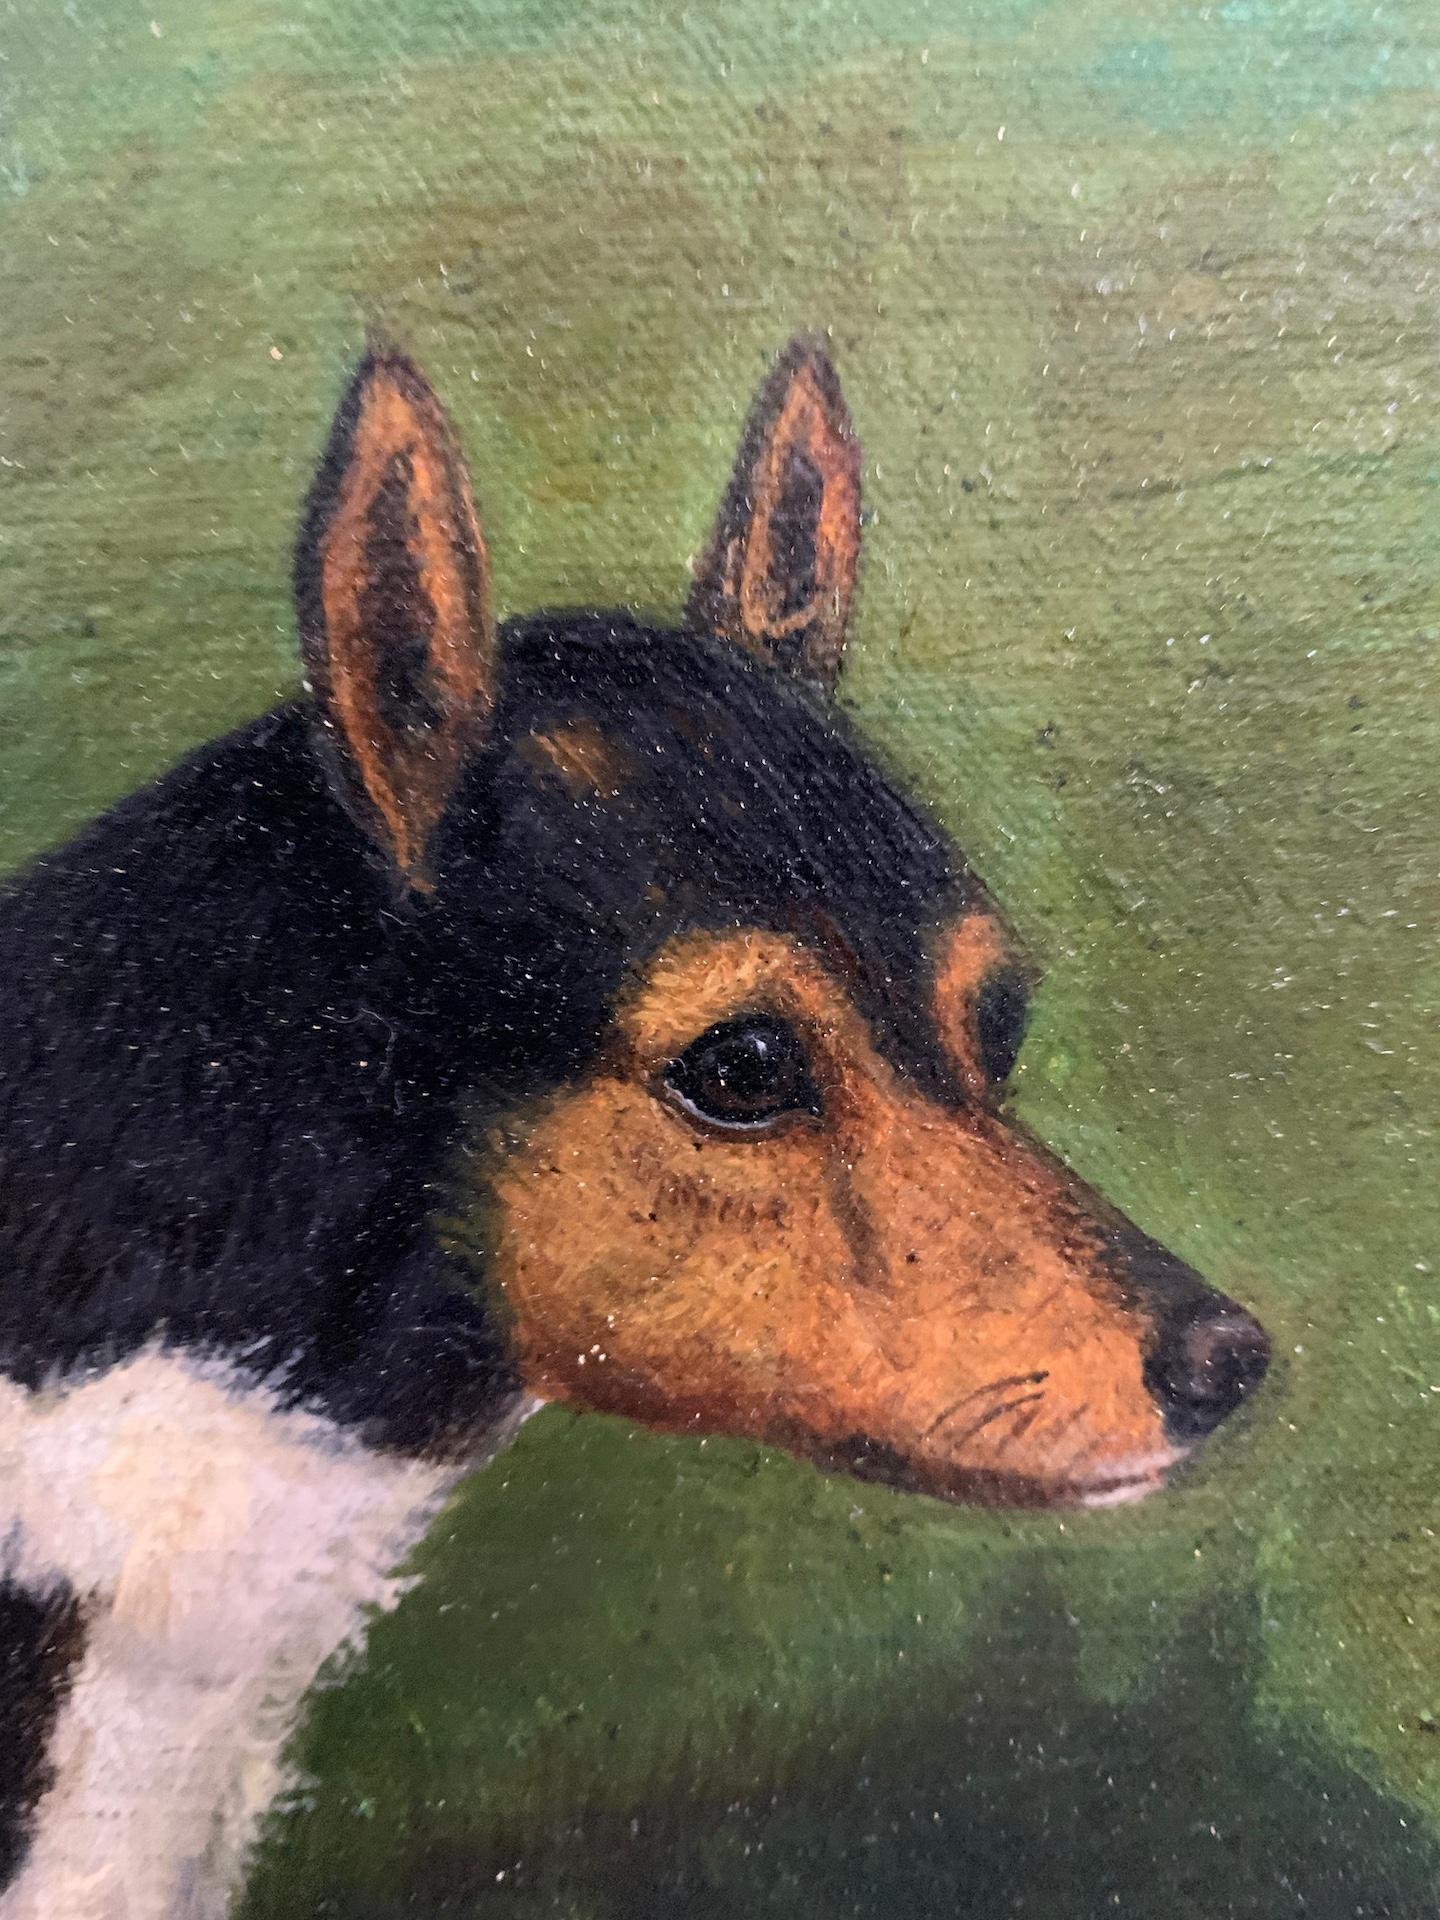 English Portrait of a Jack Russell Terrier dog in a landscape, 'Flusie'

William Albert Clark was an English animal portrait painter. He was the son of the famous Victorian animal painter, Albert Clark. 

He lived and worked in London, where he